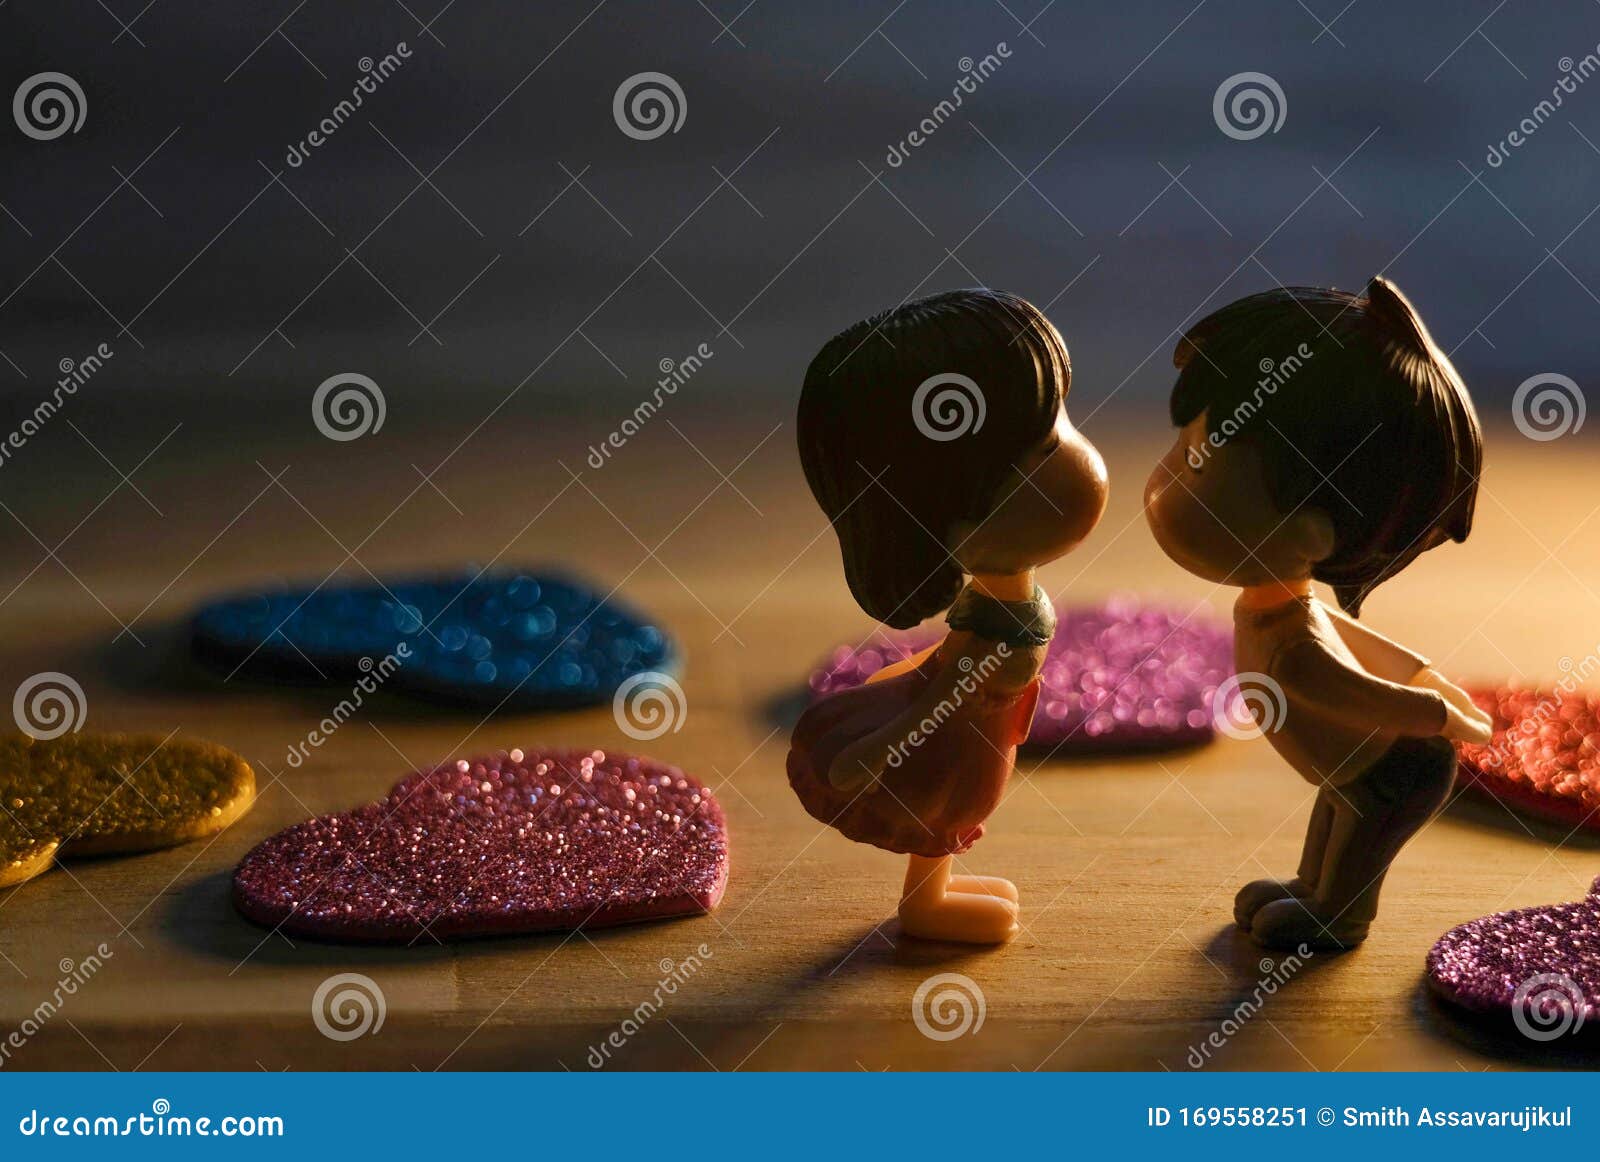 The Miniature Couple Dolls Boy and Girl Romantic Kiss at Night ...